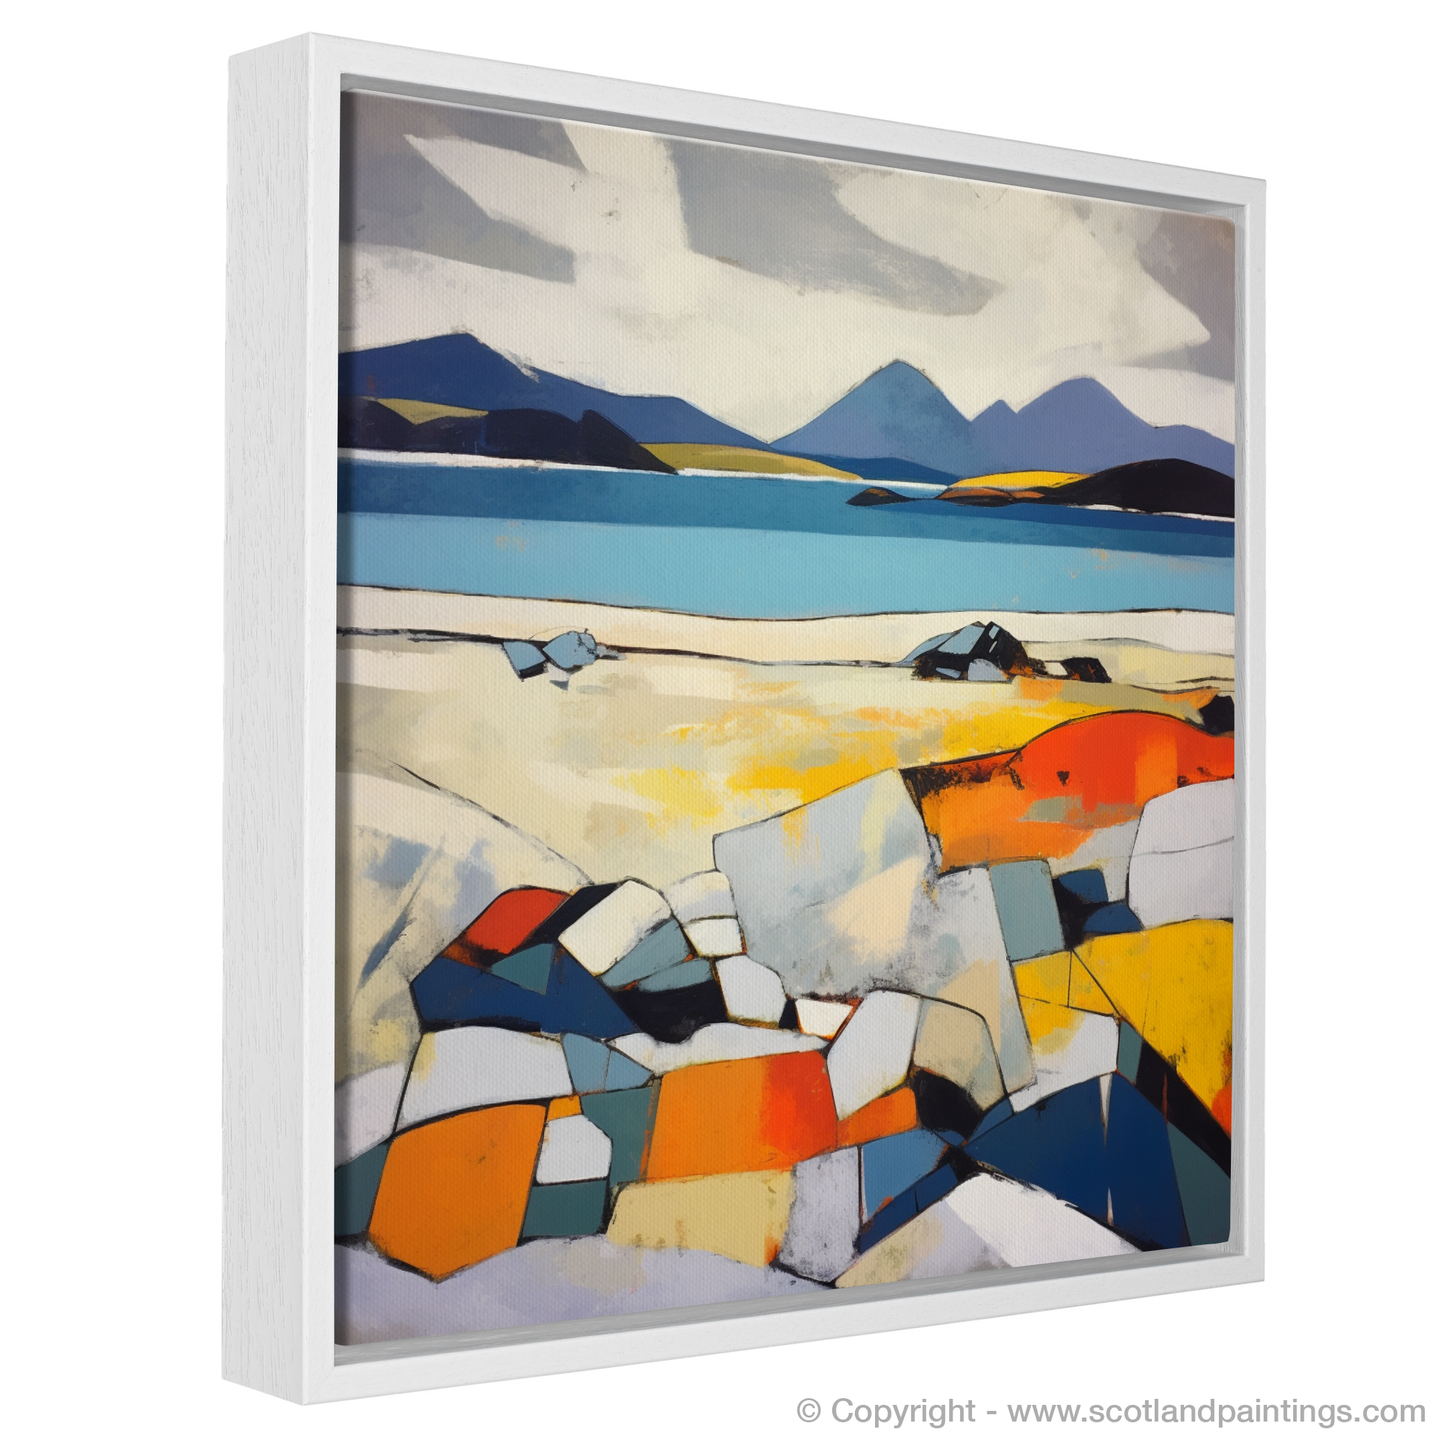 Painting and Art Print of Mellon Udrigle Beach, Wester Ross entitled "Mellon Udrigle Abstract Essence".